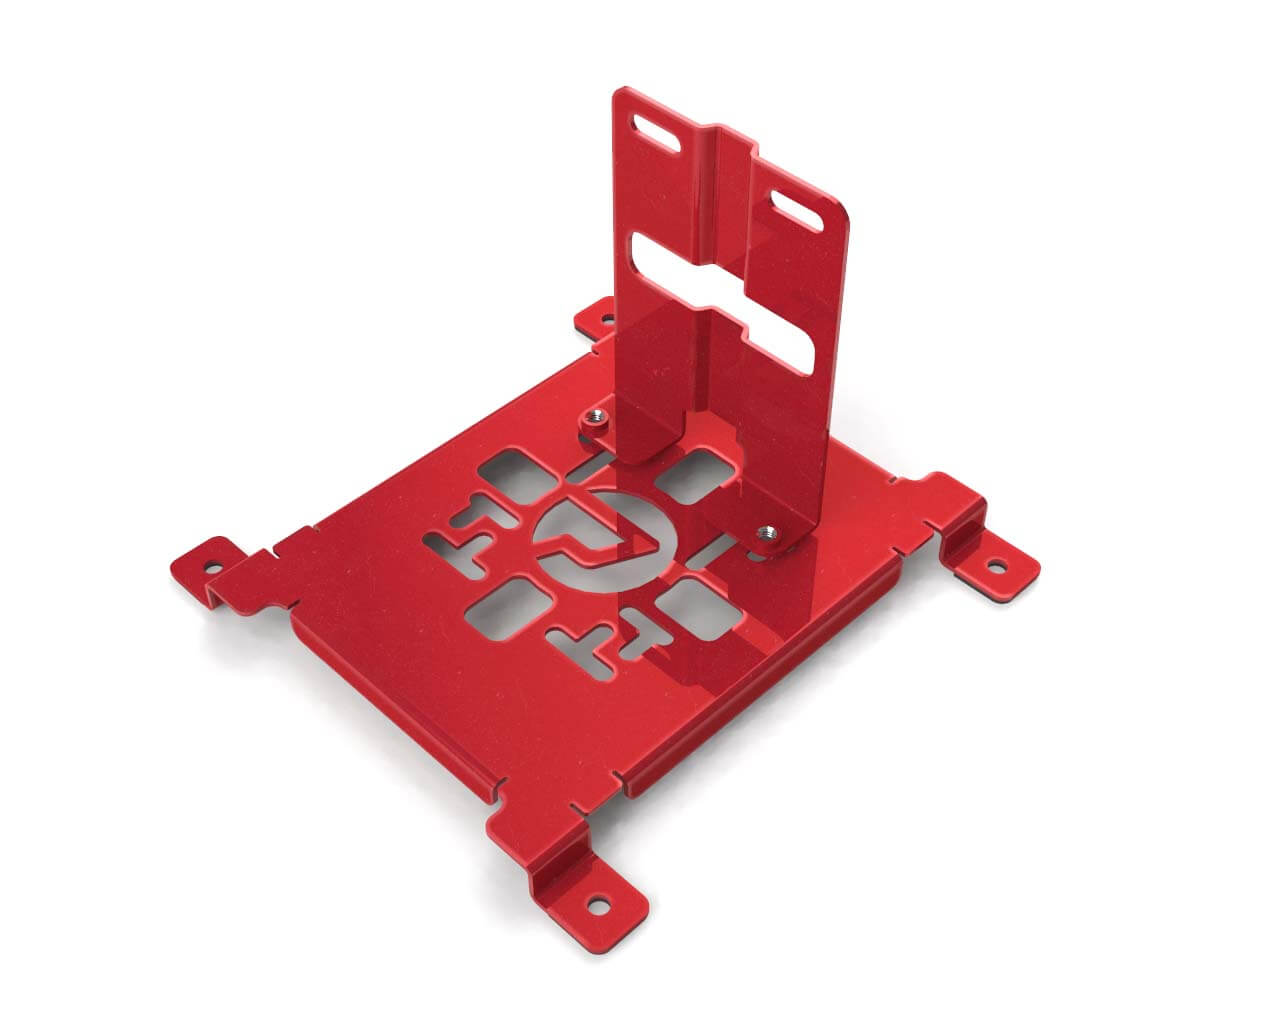 PrimoChill SX CTR2 Spider Mount Bracket Kit - 140mm Series - PrimoChill - KEEPING IT COOL Candy Red